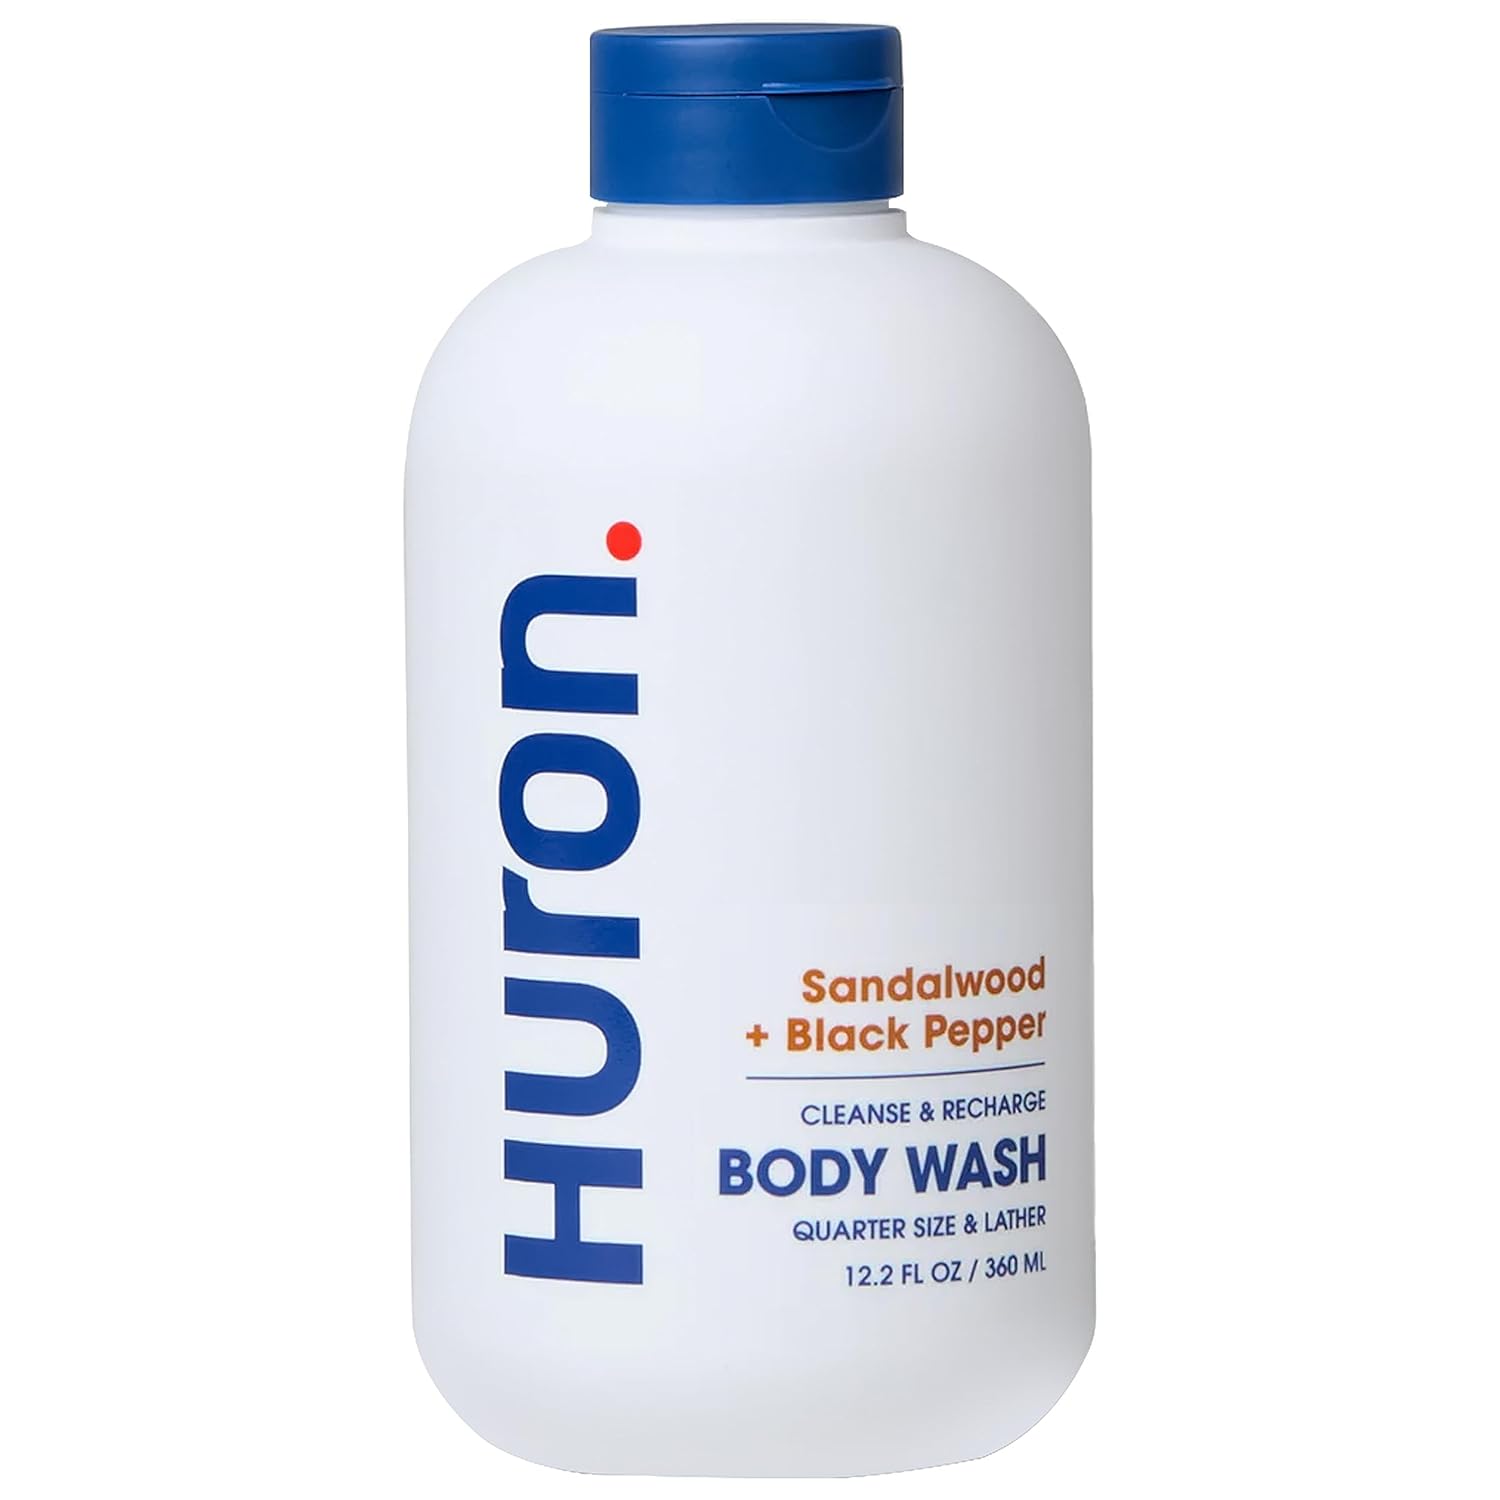 Huron Men’s Moisturizing Body Wash - Clean & Woody Scent of Sandalwood, Black Pepper, Cedarwood, & Amber - Made With Coconut Oil, Vitamin E & Witch Hazel - Vegan, Cruelty-Free - 12.2